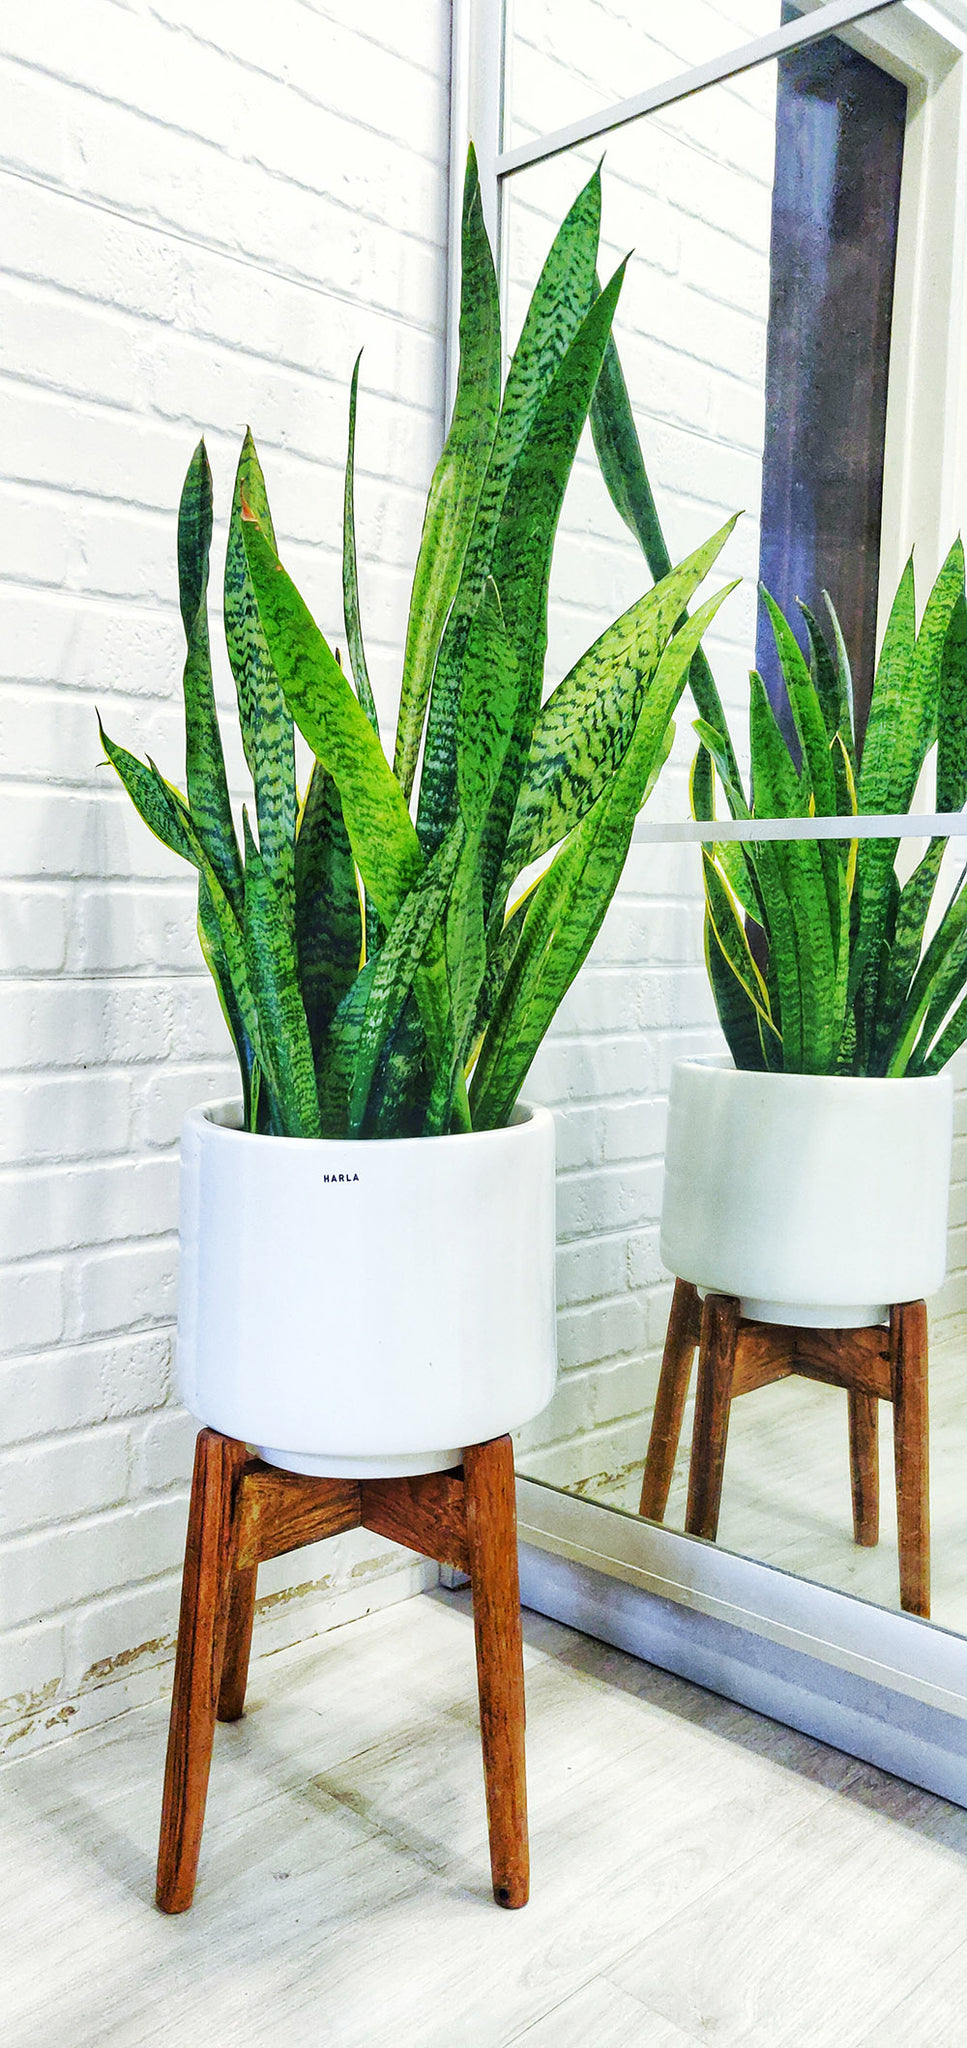 Medium Size Crimson Sky Ceramic Planter with Wooden Stand and Snake Plant  in it.